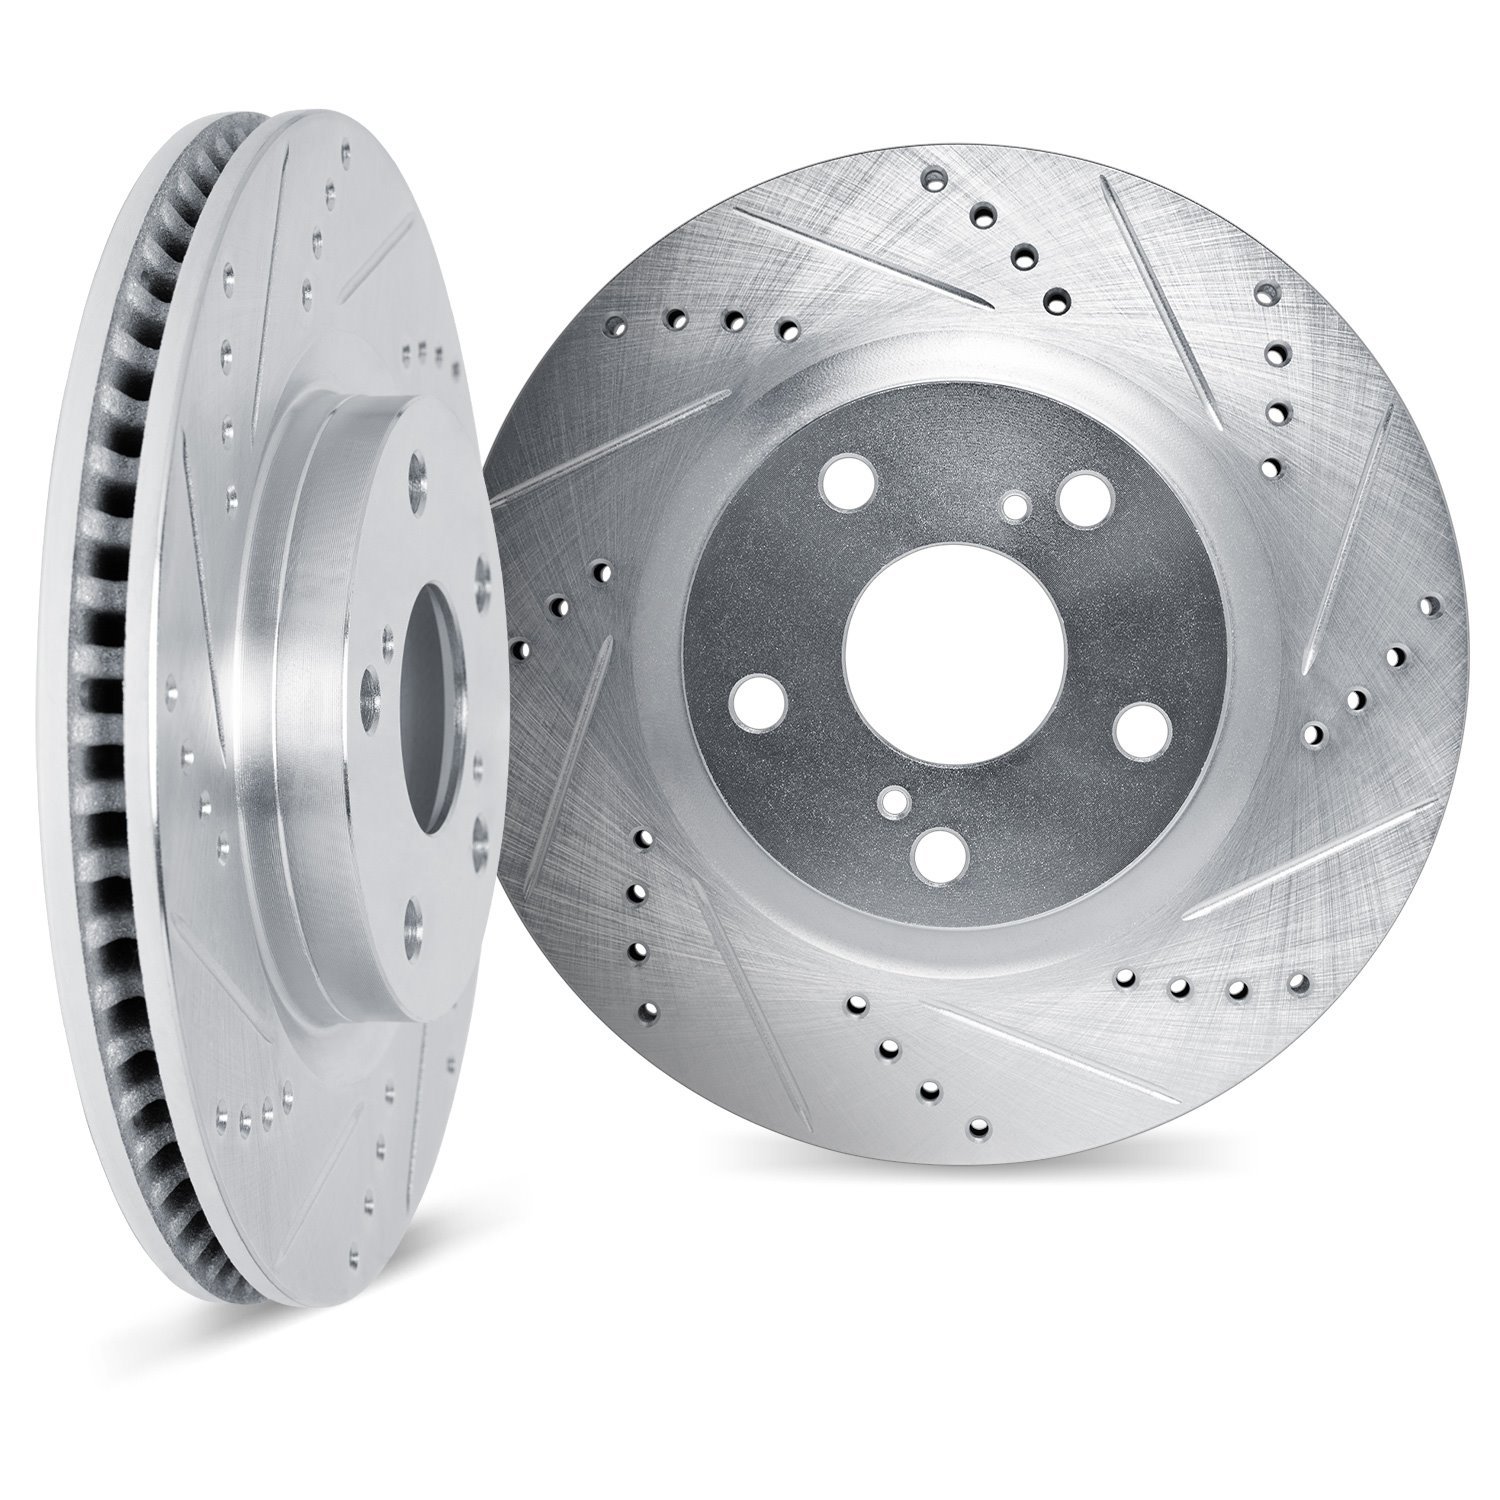 7002-58037 Drilled/Slotted Brake Rotors [Silver], Fits Select Acura/Honda, Position: Front